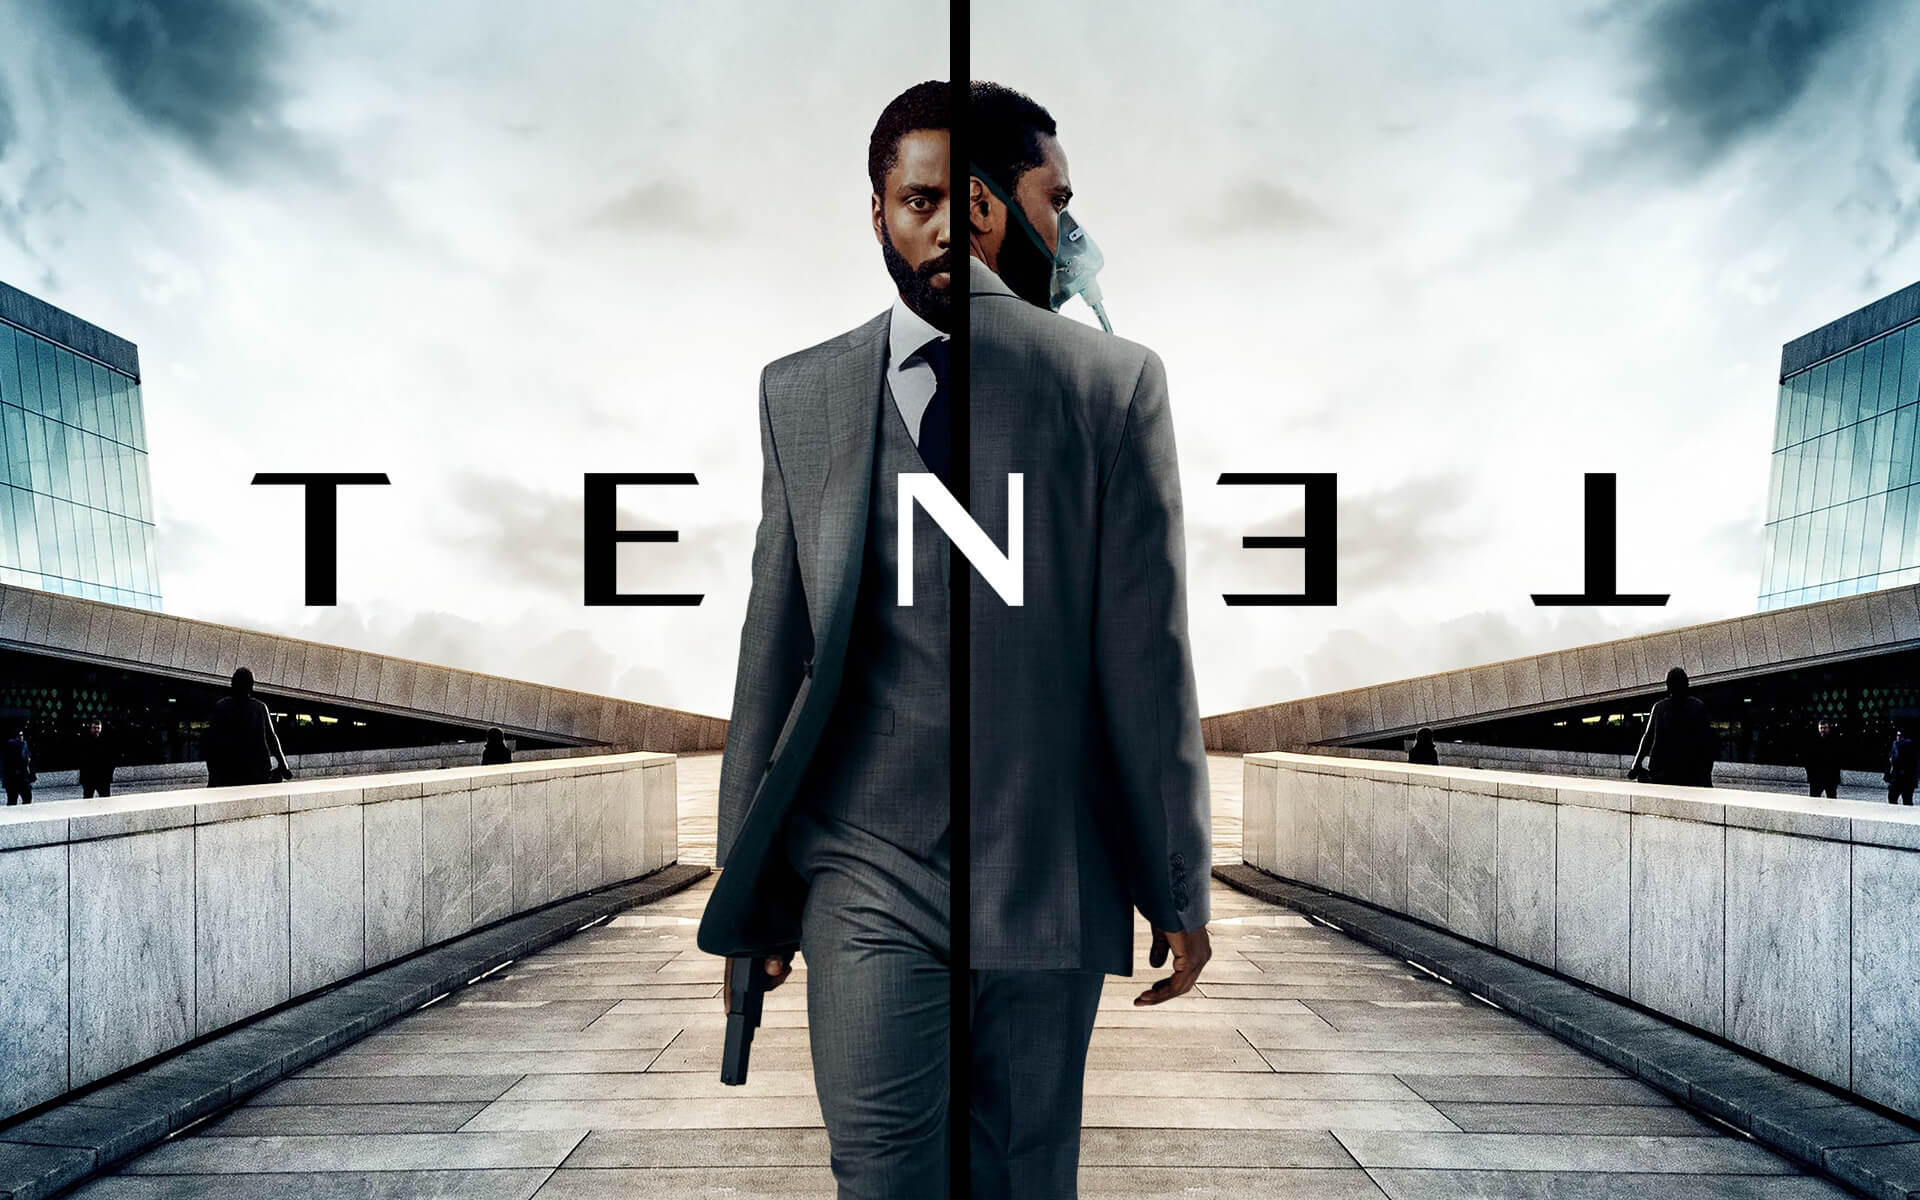 tenet movie review in english